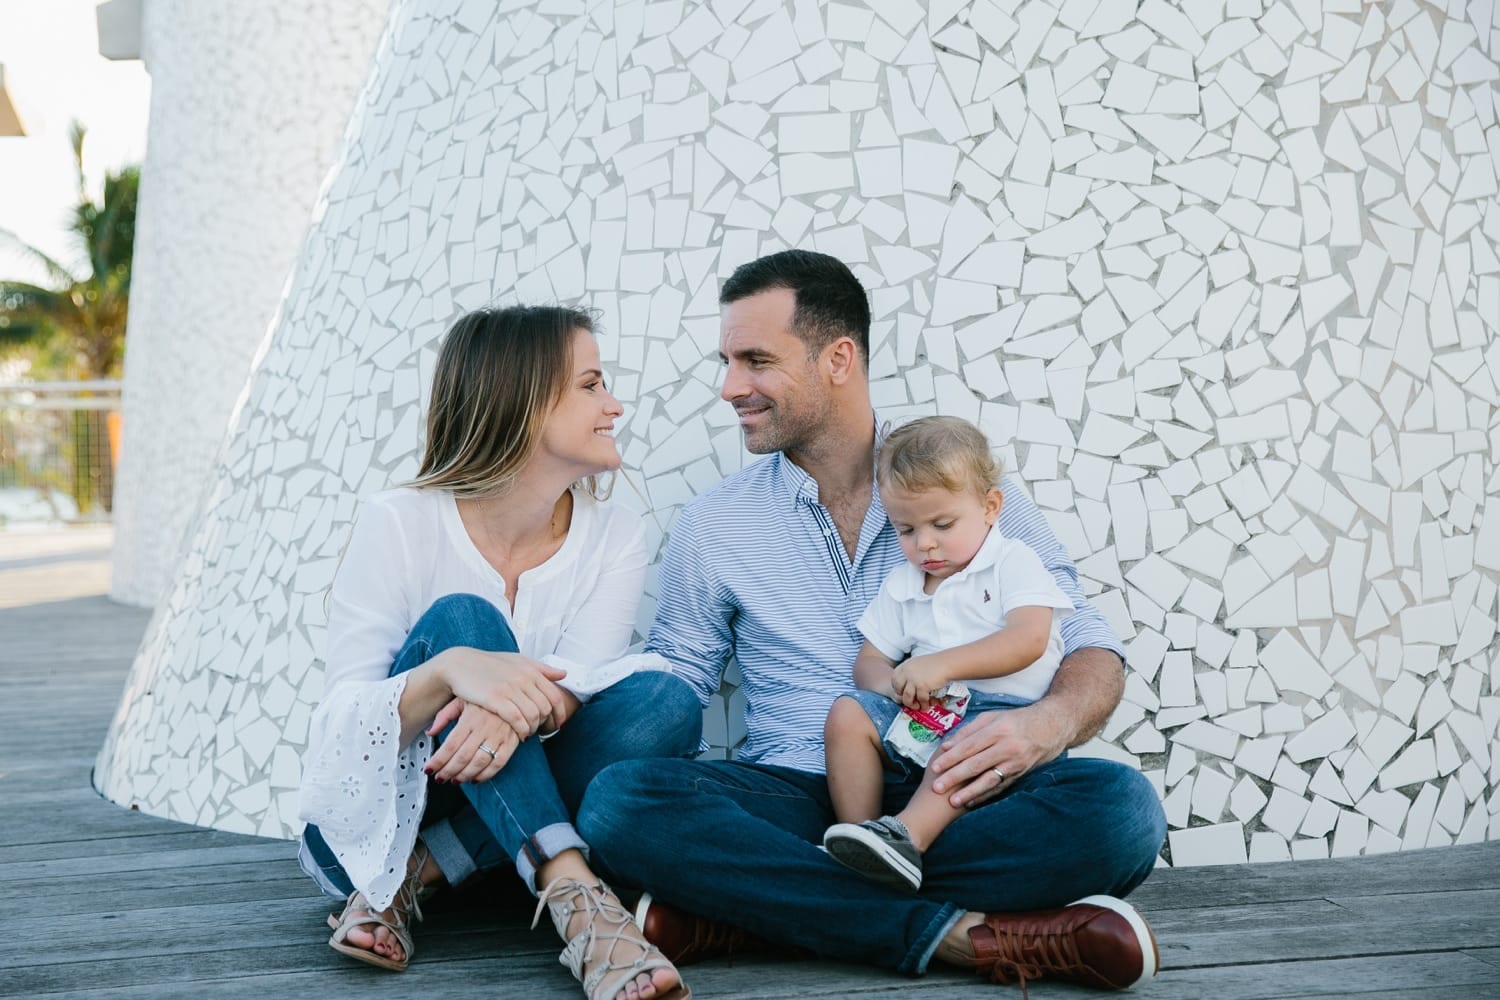 fun family session at South Pointe Park in South Beach Fl #Lifestyle #MiamiFamilyPhotographer